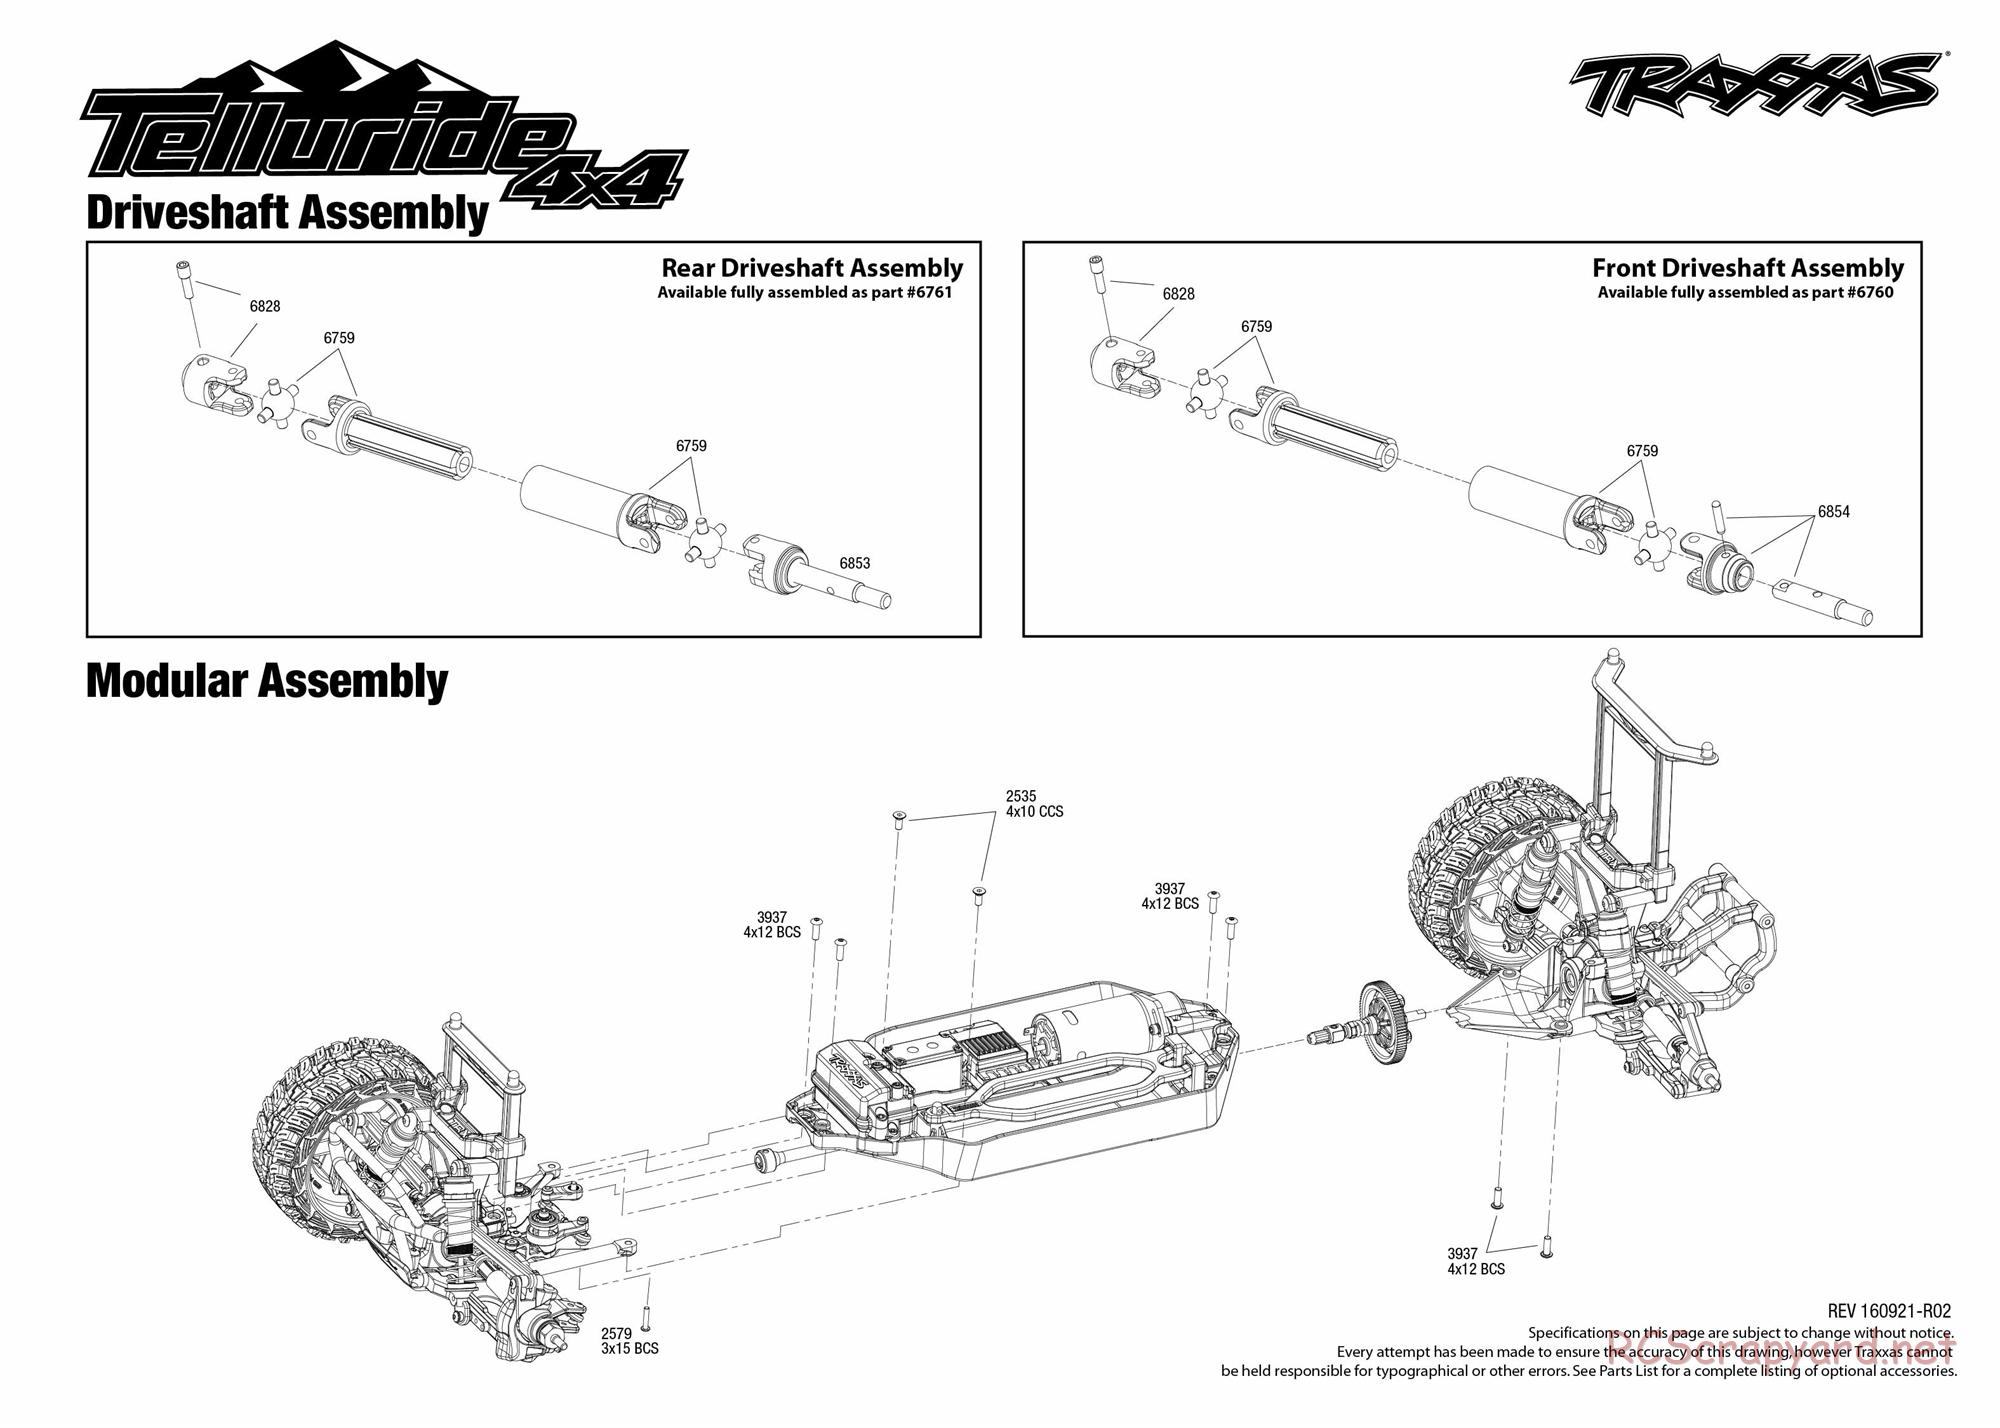 Traxxas - Telluride 4x4 (2015) - Exploded Views - Page 2